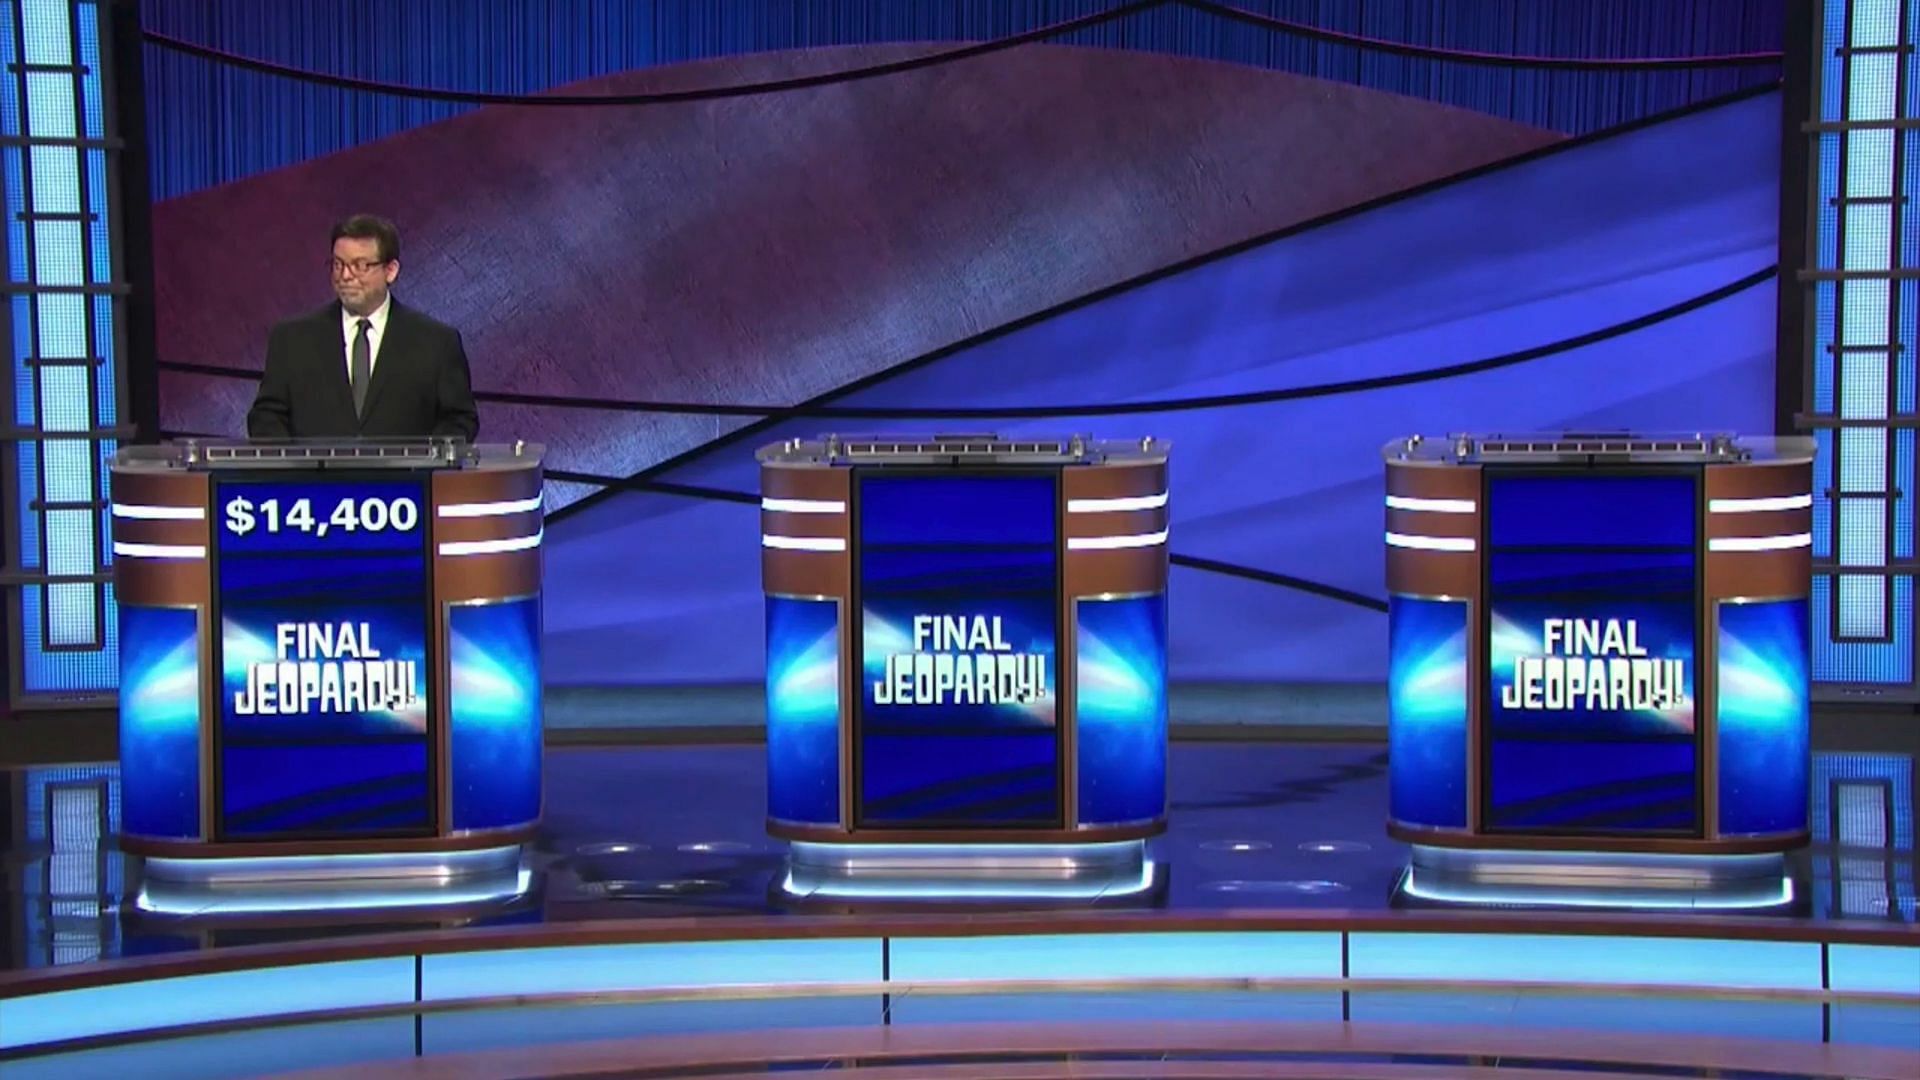 Today’s Final Jeopardy! answer Friday, December 2, 2022